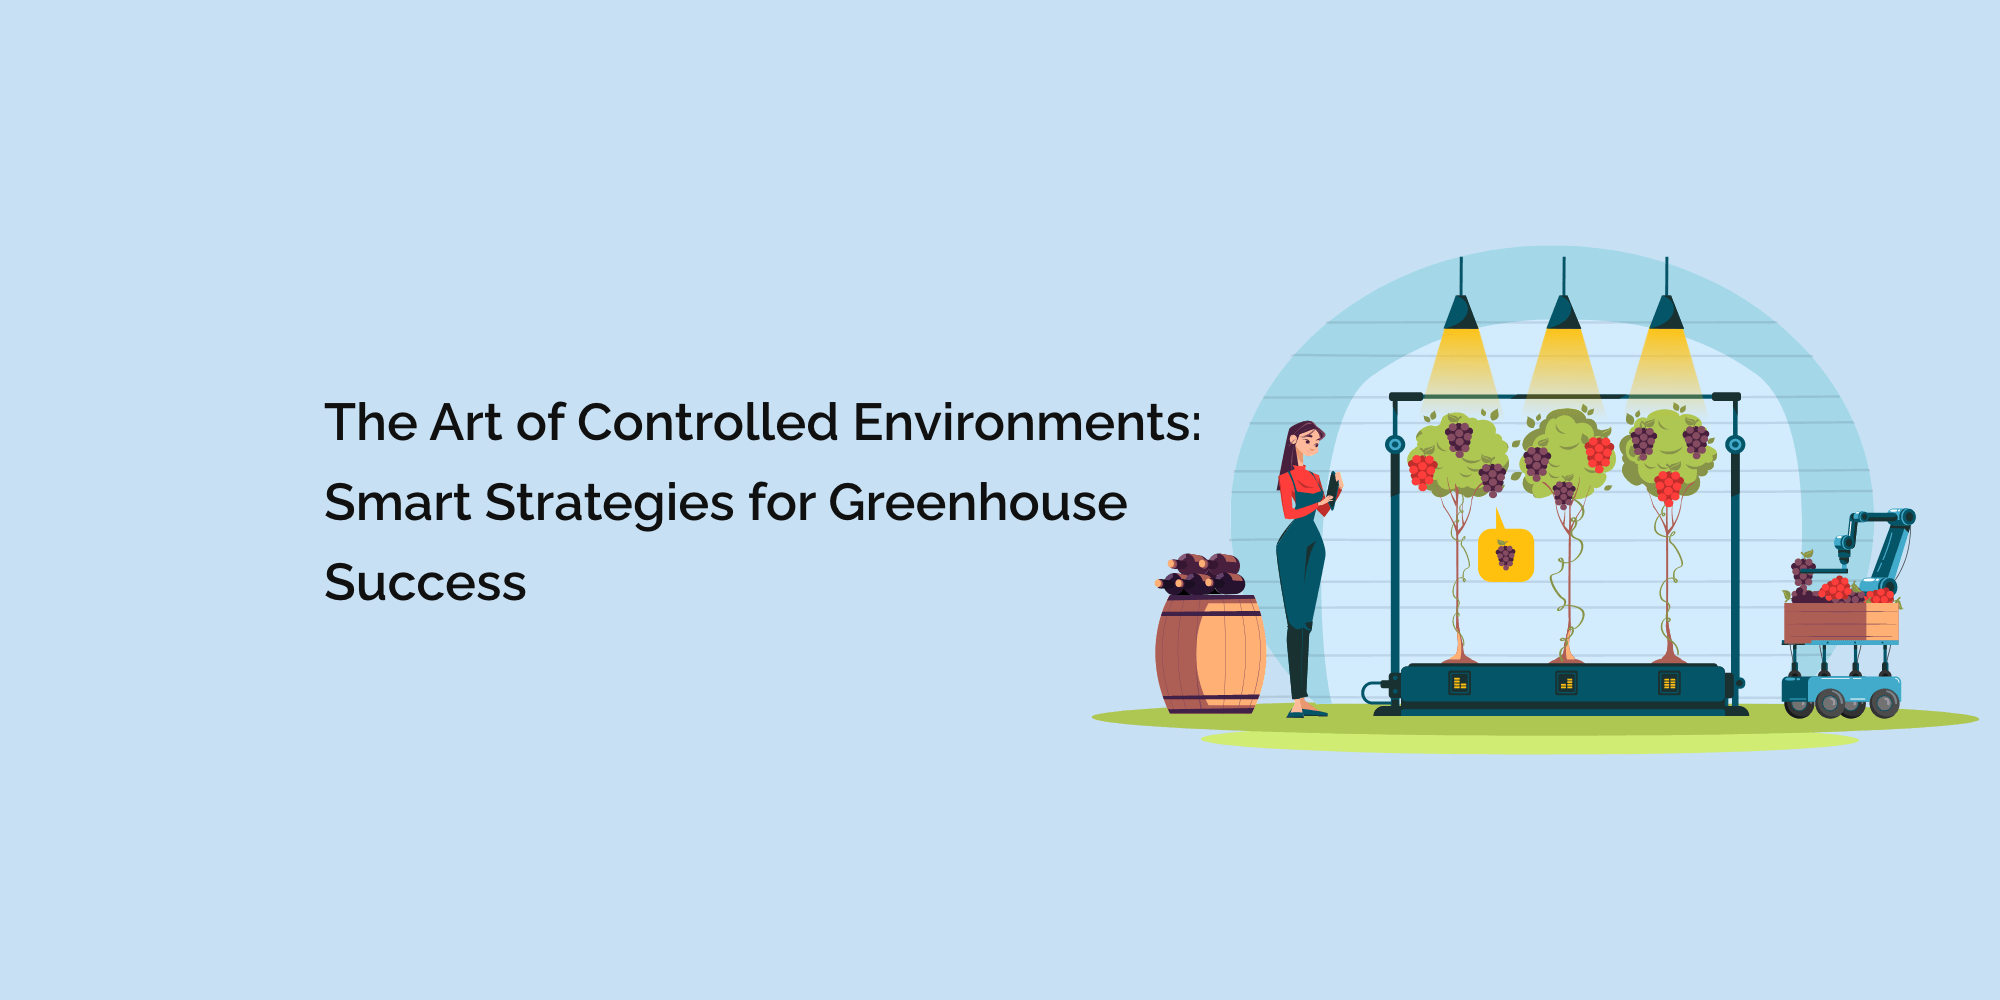 The Art of Controlled Environments: Smart Strategies for Greenhouse Success